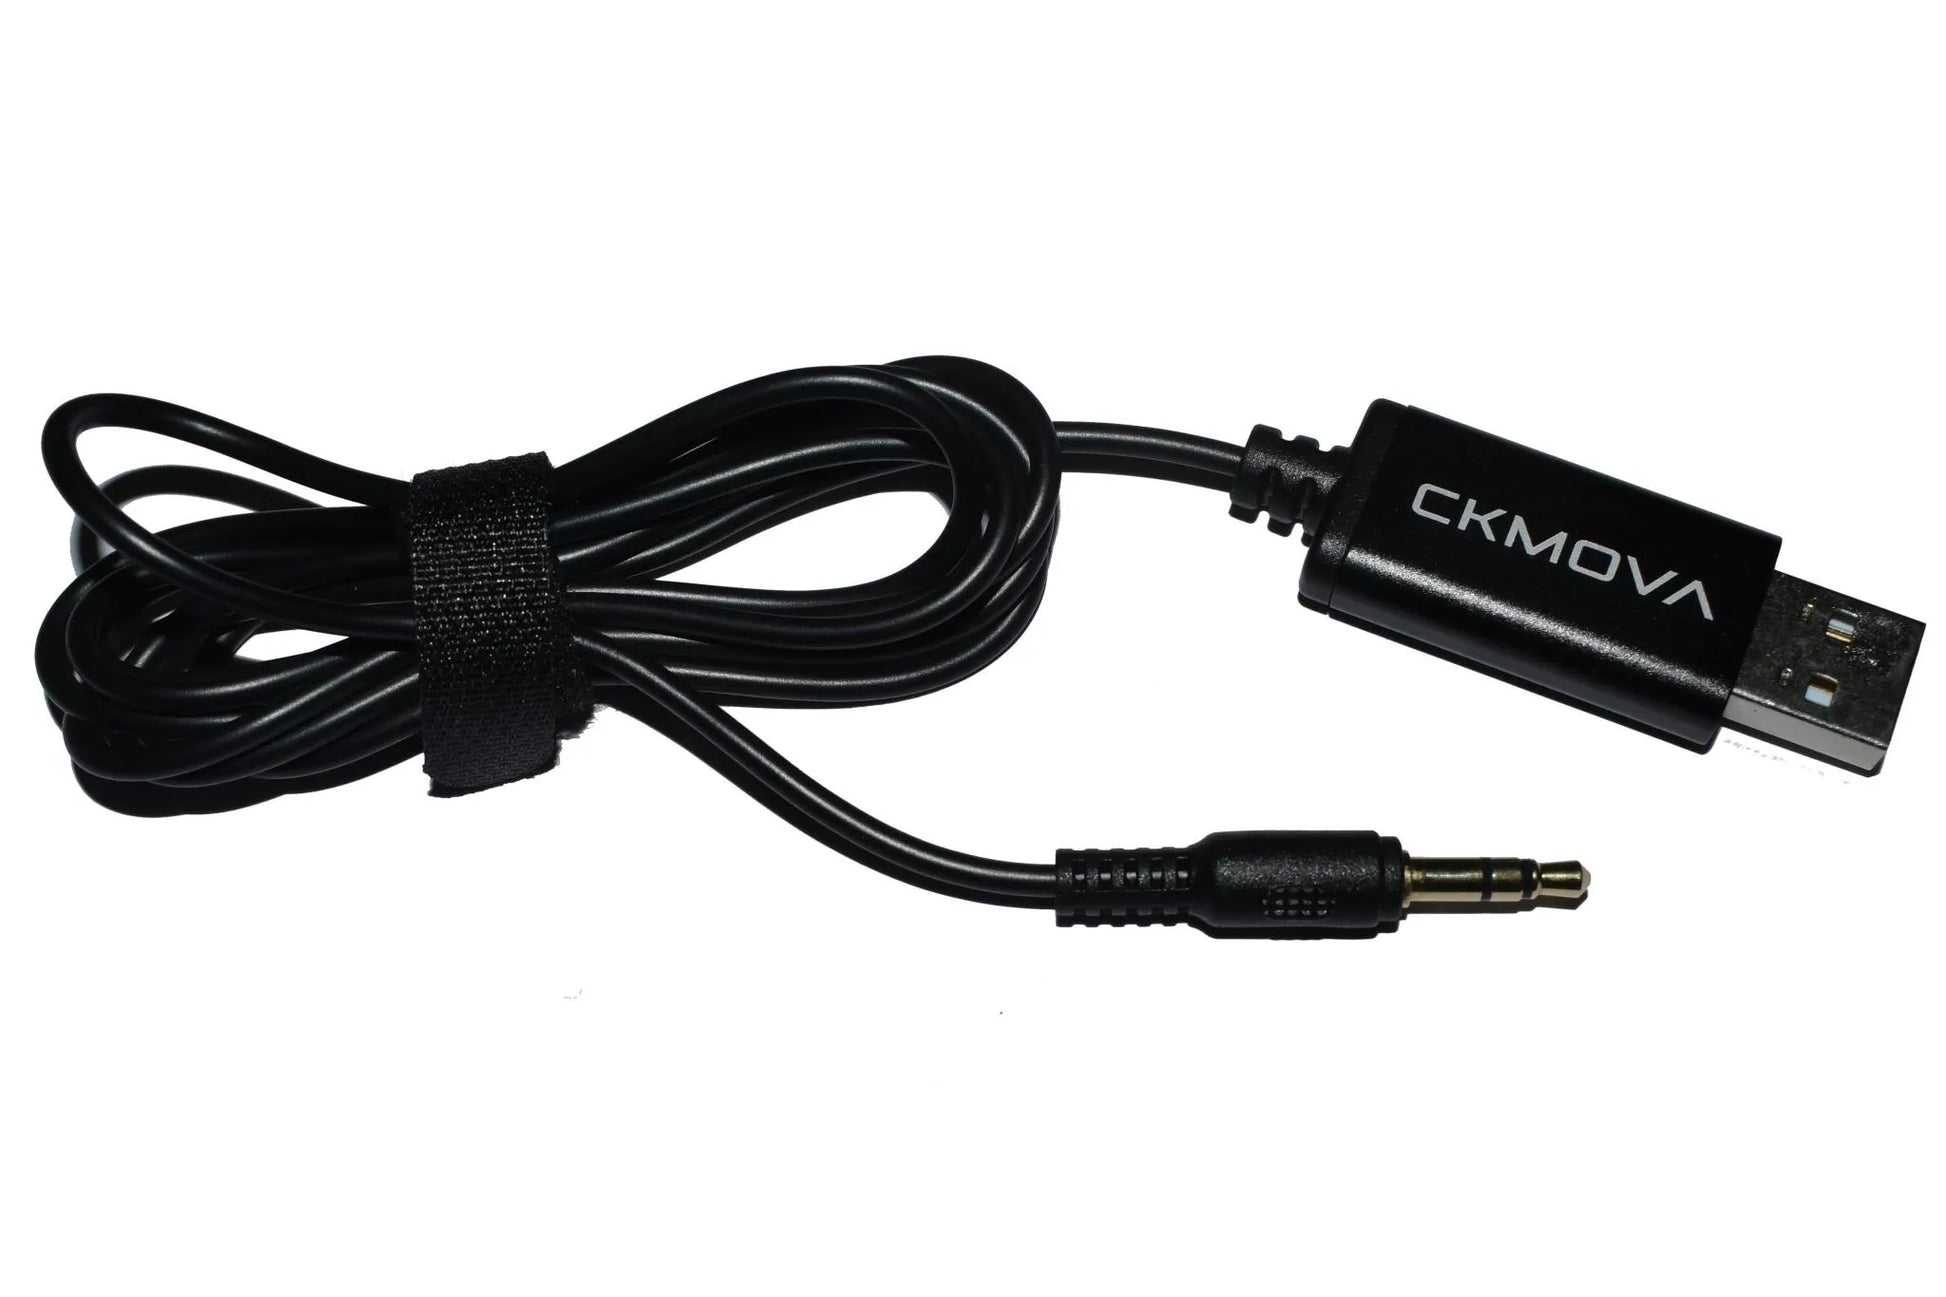 CKMOVA AC-A35 3.5mm TRS to USB-A 2.0 Cable - Black, 1.2m - ProSound